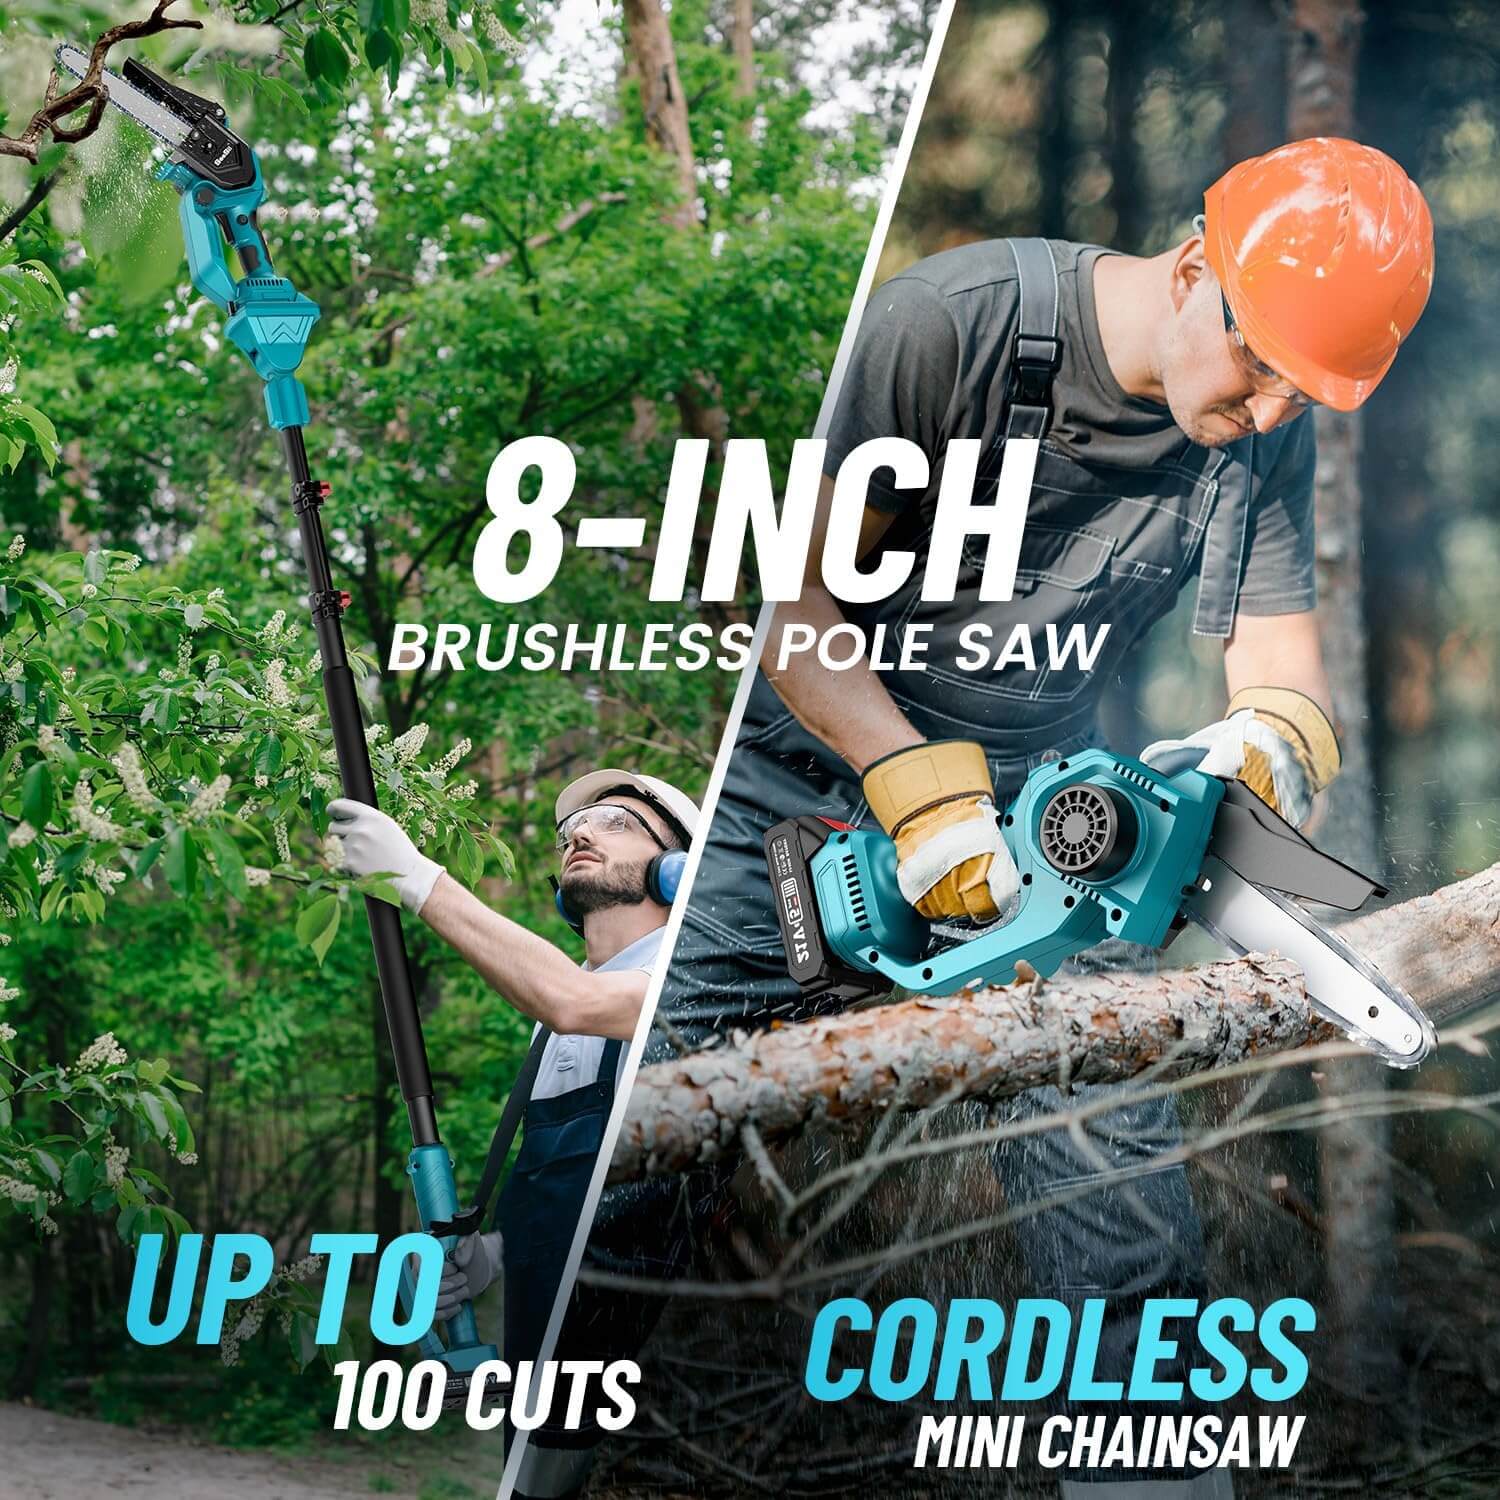 Compared to traditional chainsaws, the iToolMax 2 in 1 Chainsaw & Pruning Shears with Pole Saw with adjustable length pole handles high branches and wood cutting without dangerous ladder climbing or traditional hand tools, making it safer and easier to operate. Using a brushless electric motor creates zero emissions and is quieter than a gas-powered chain saw.Whether you are a gardening enthusiast or a professional, this pole saw is your reliable helper.